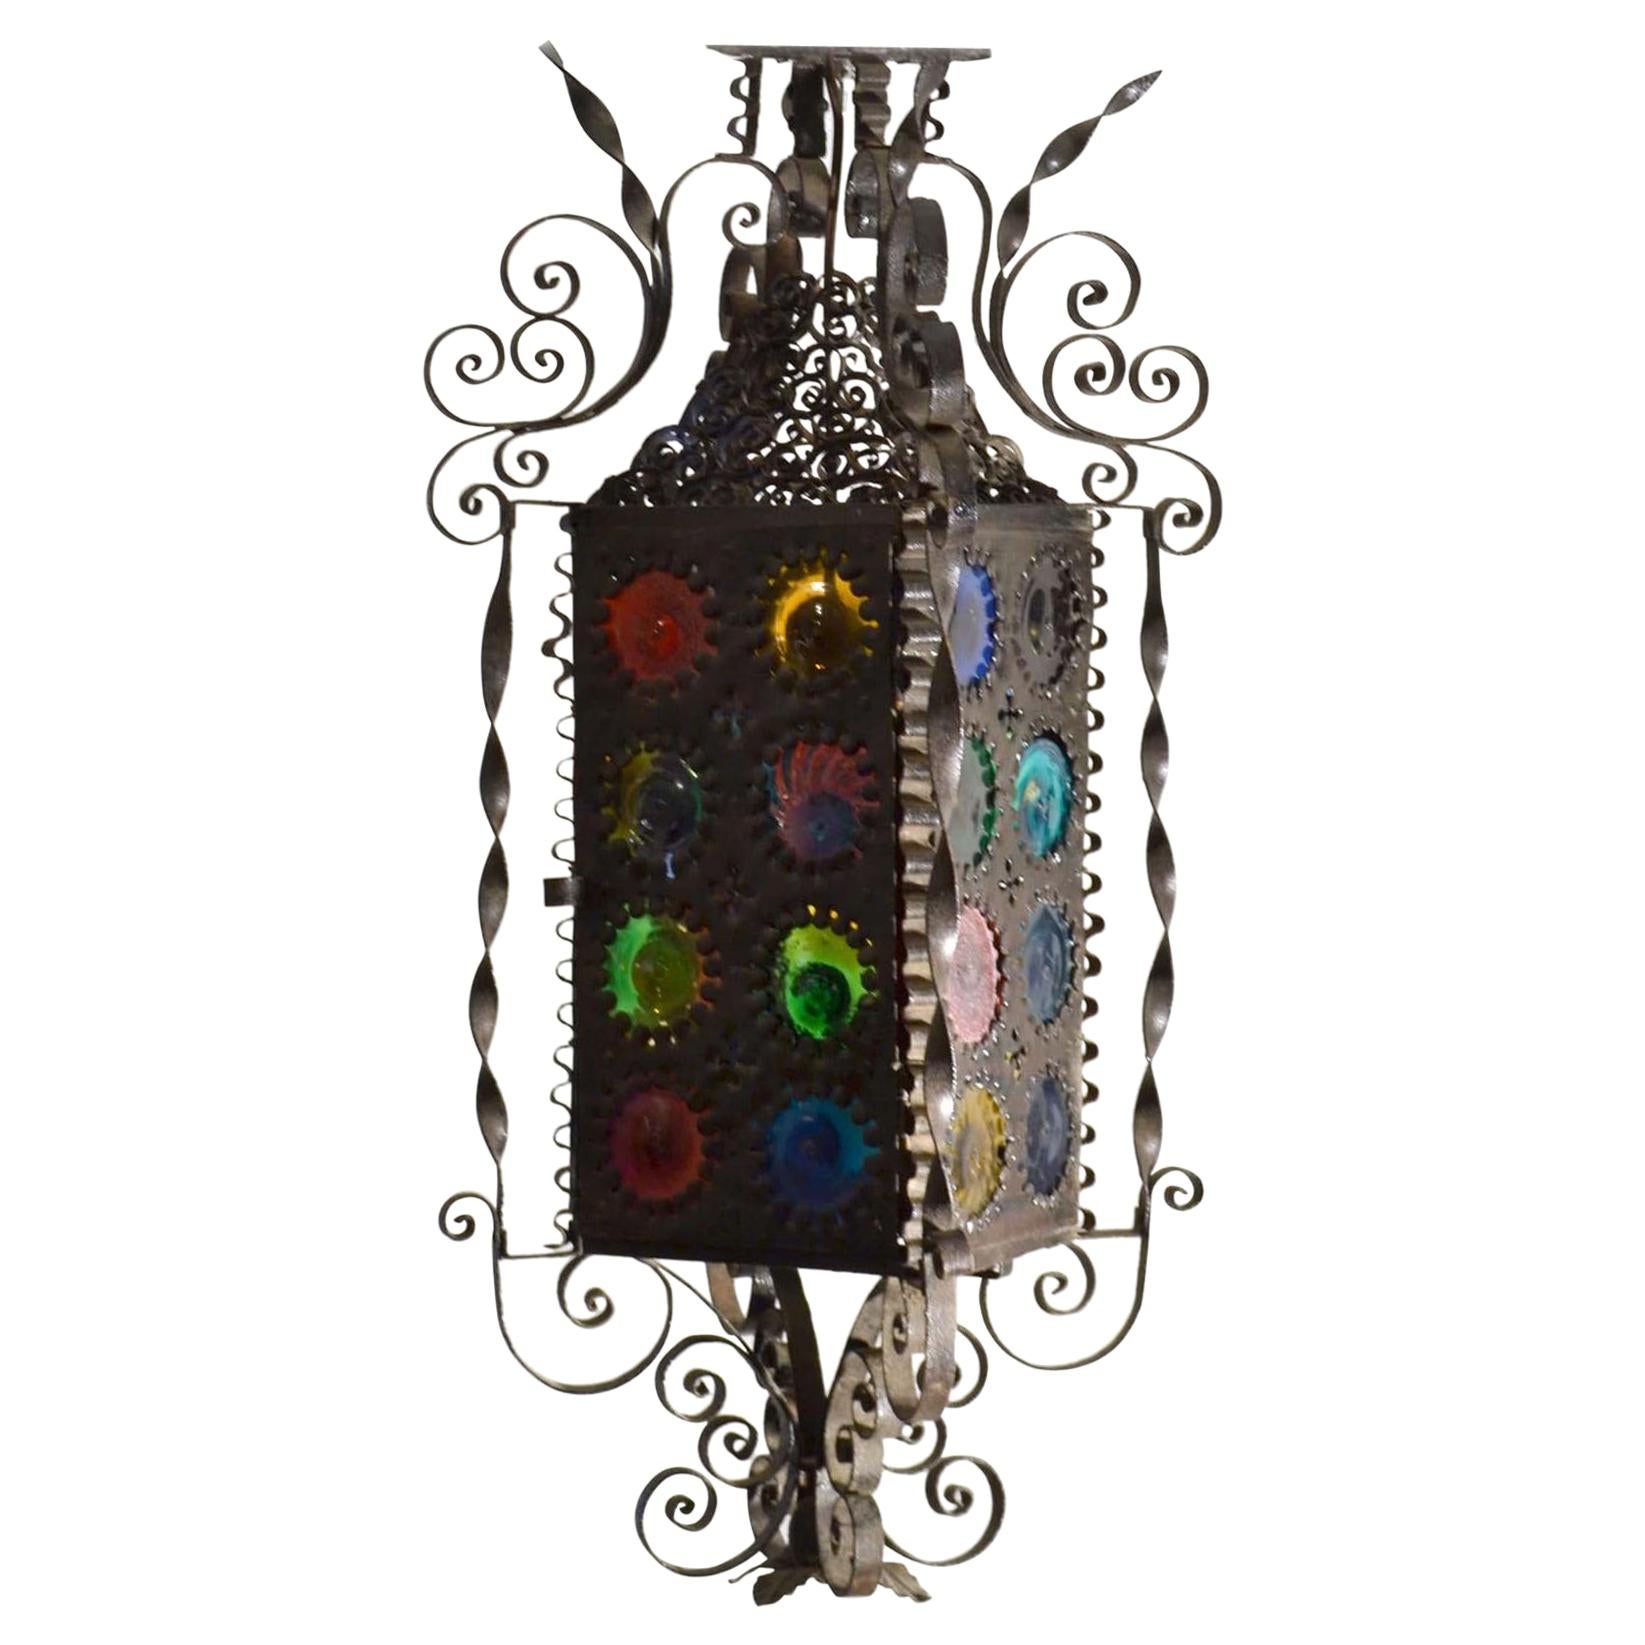 Venetian Lantern with Colored Murano Glass Disks, Late 19th Century